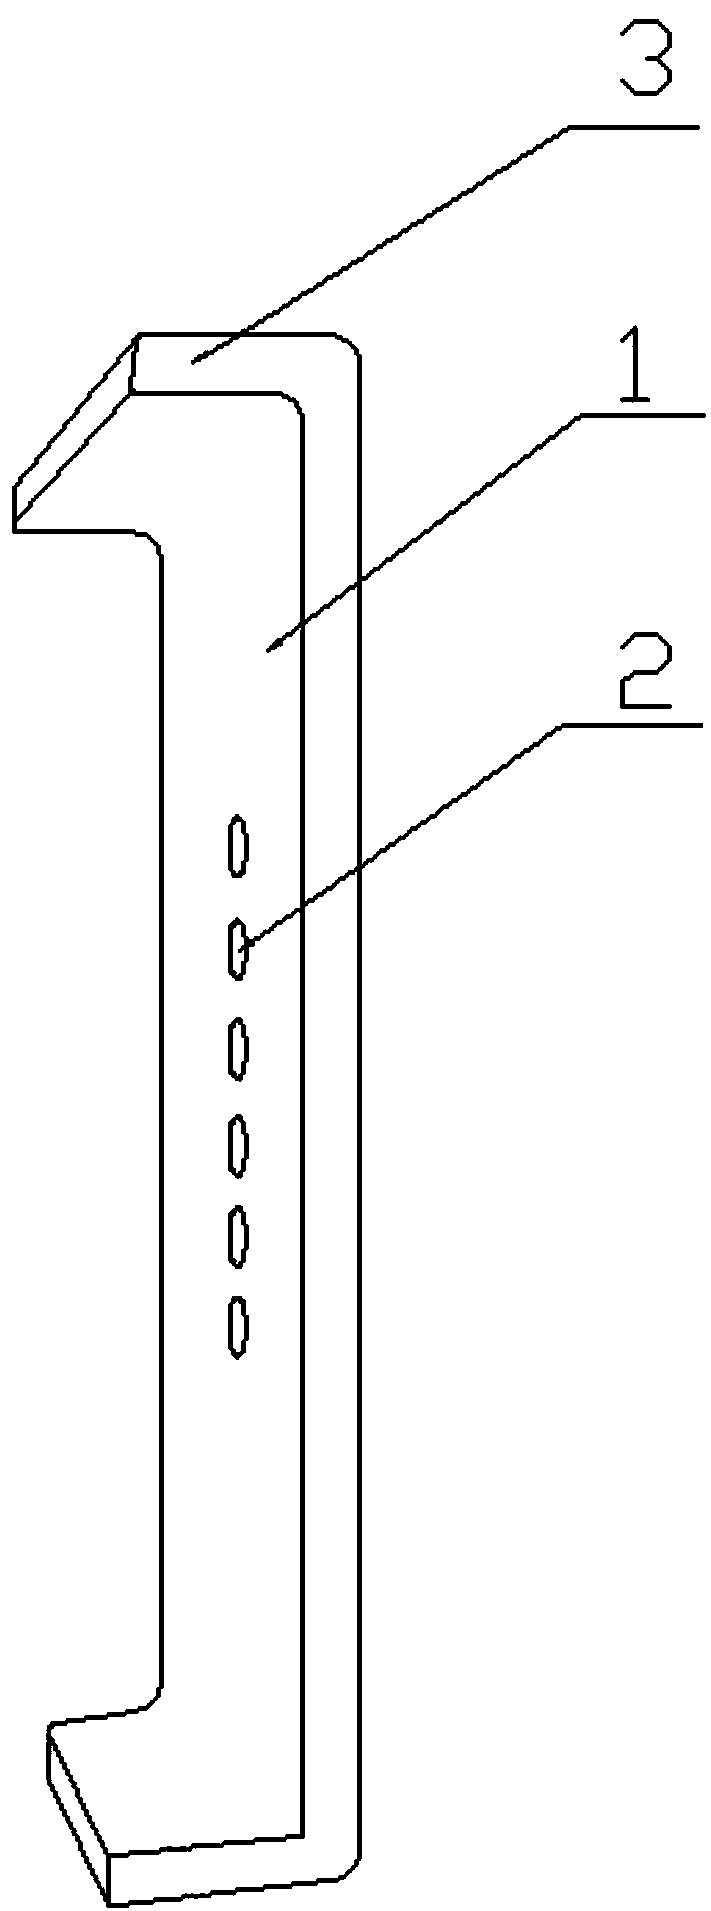 Method for determining blending ratios of milk protein modified polyacrylonitrile fibers to wools